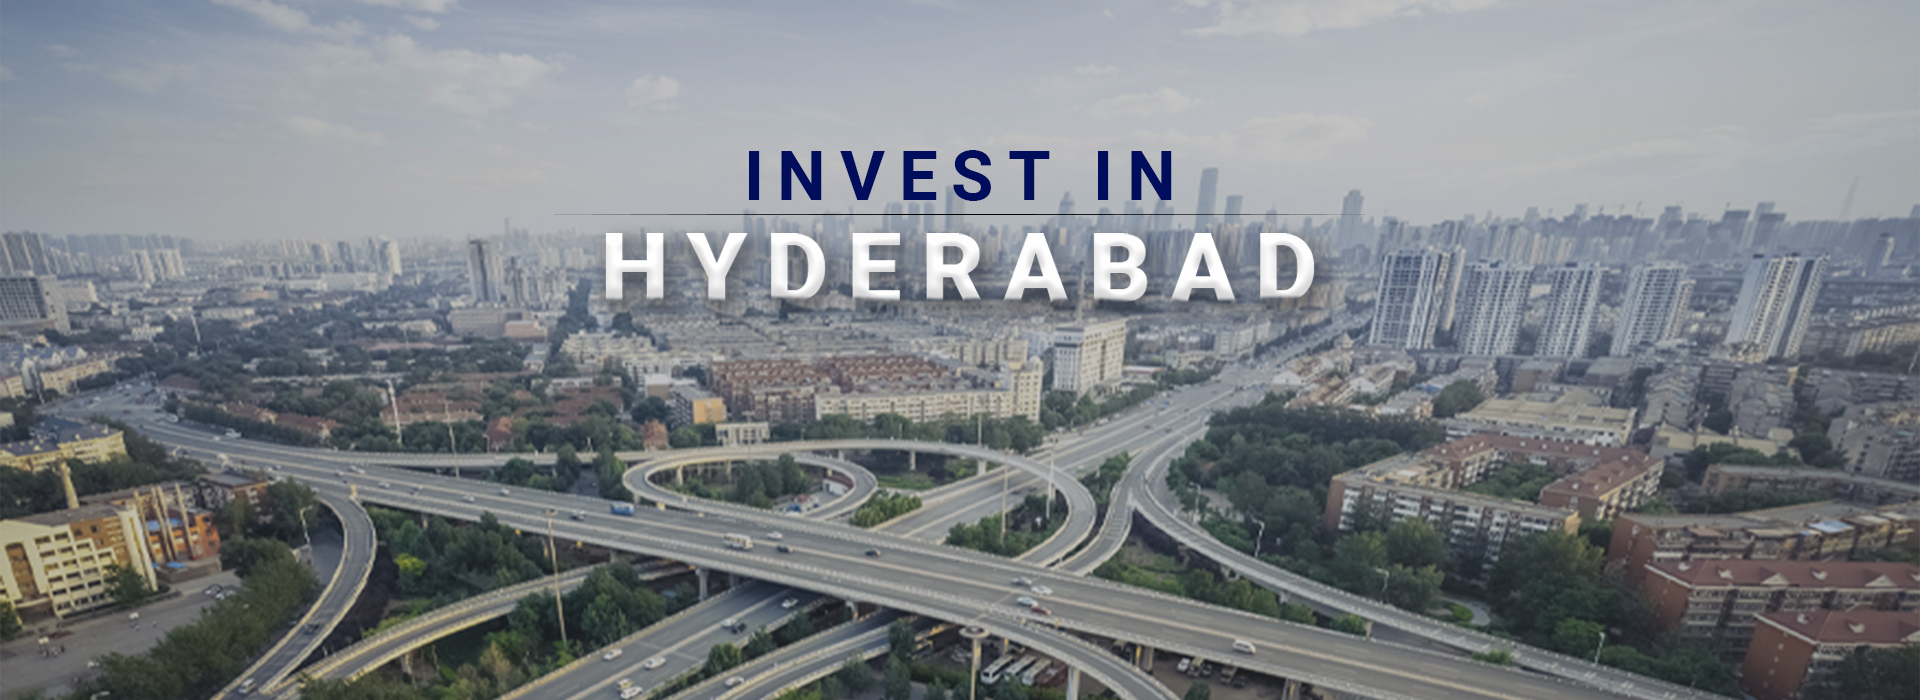 Investing in Hyderabad Real Estate: Why Villa Plots at Epitome Integrated City are a Smart Choice